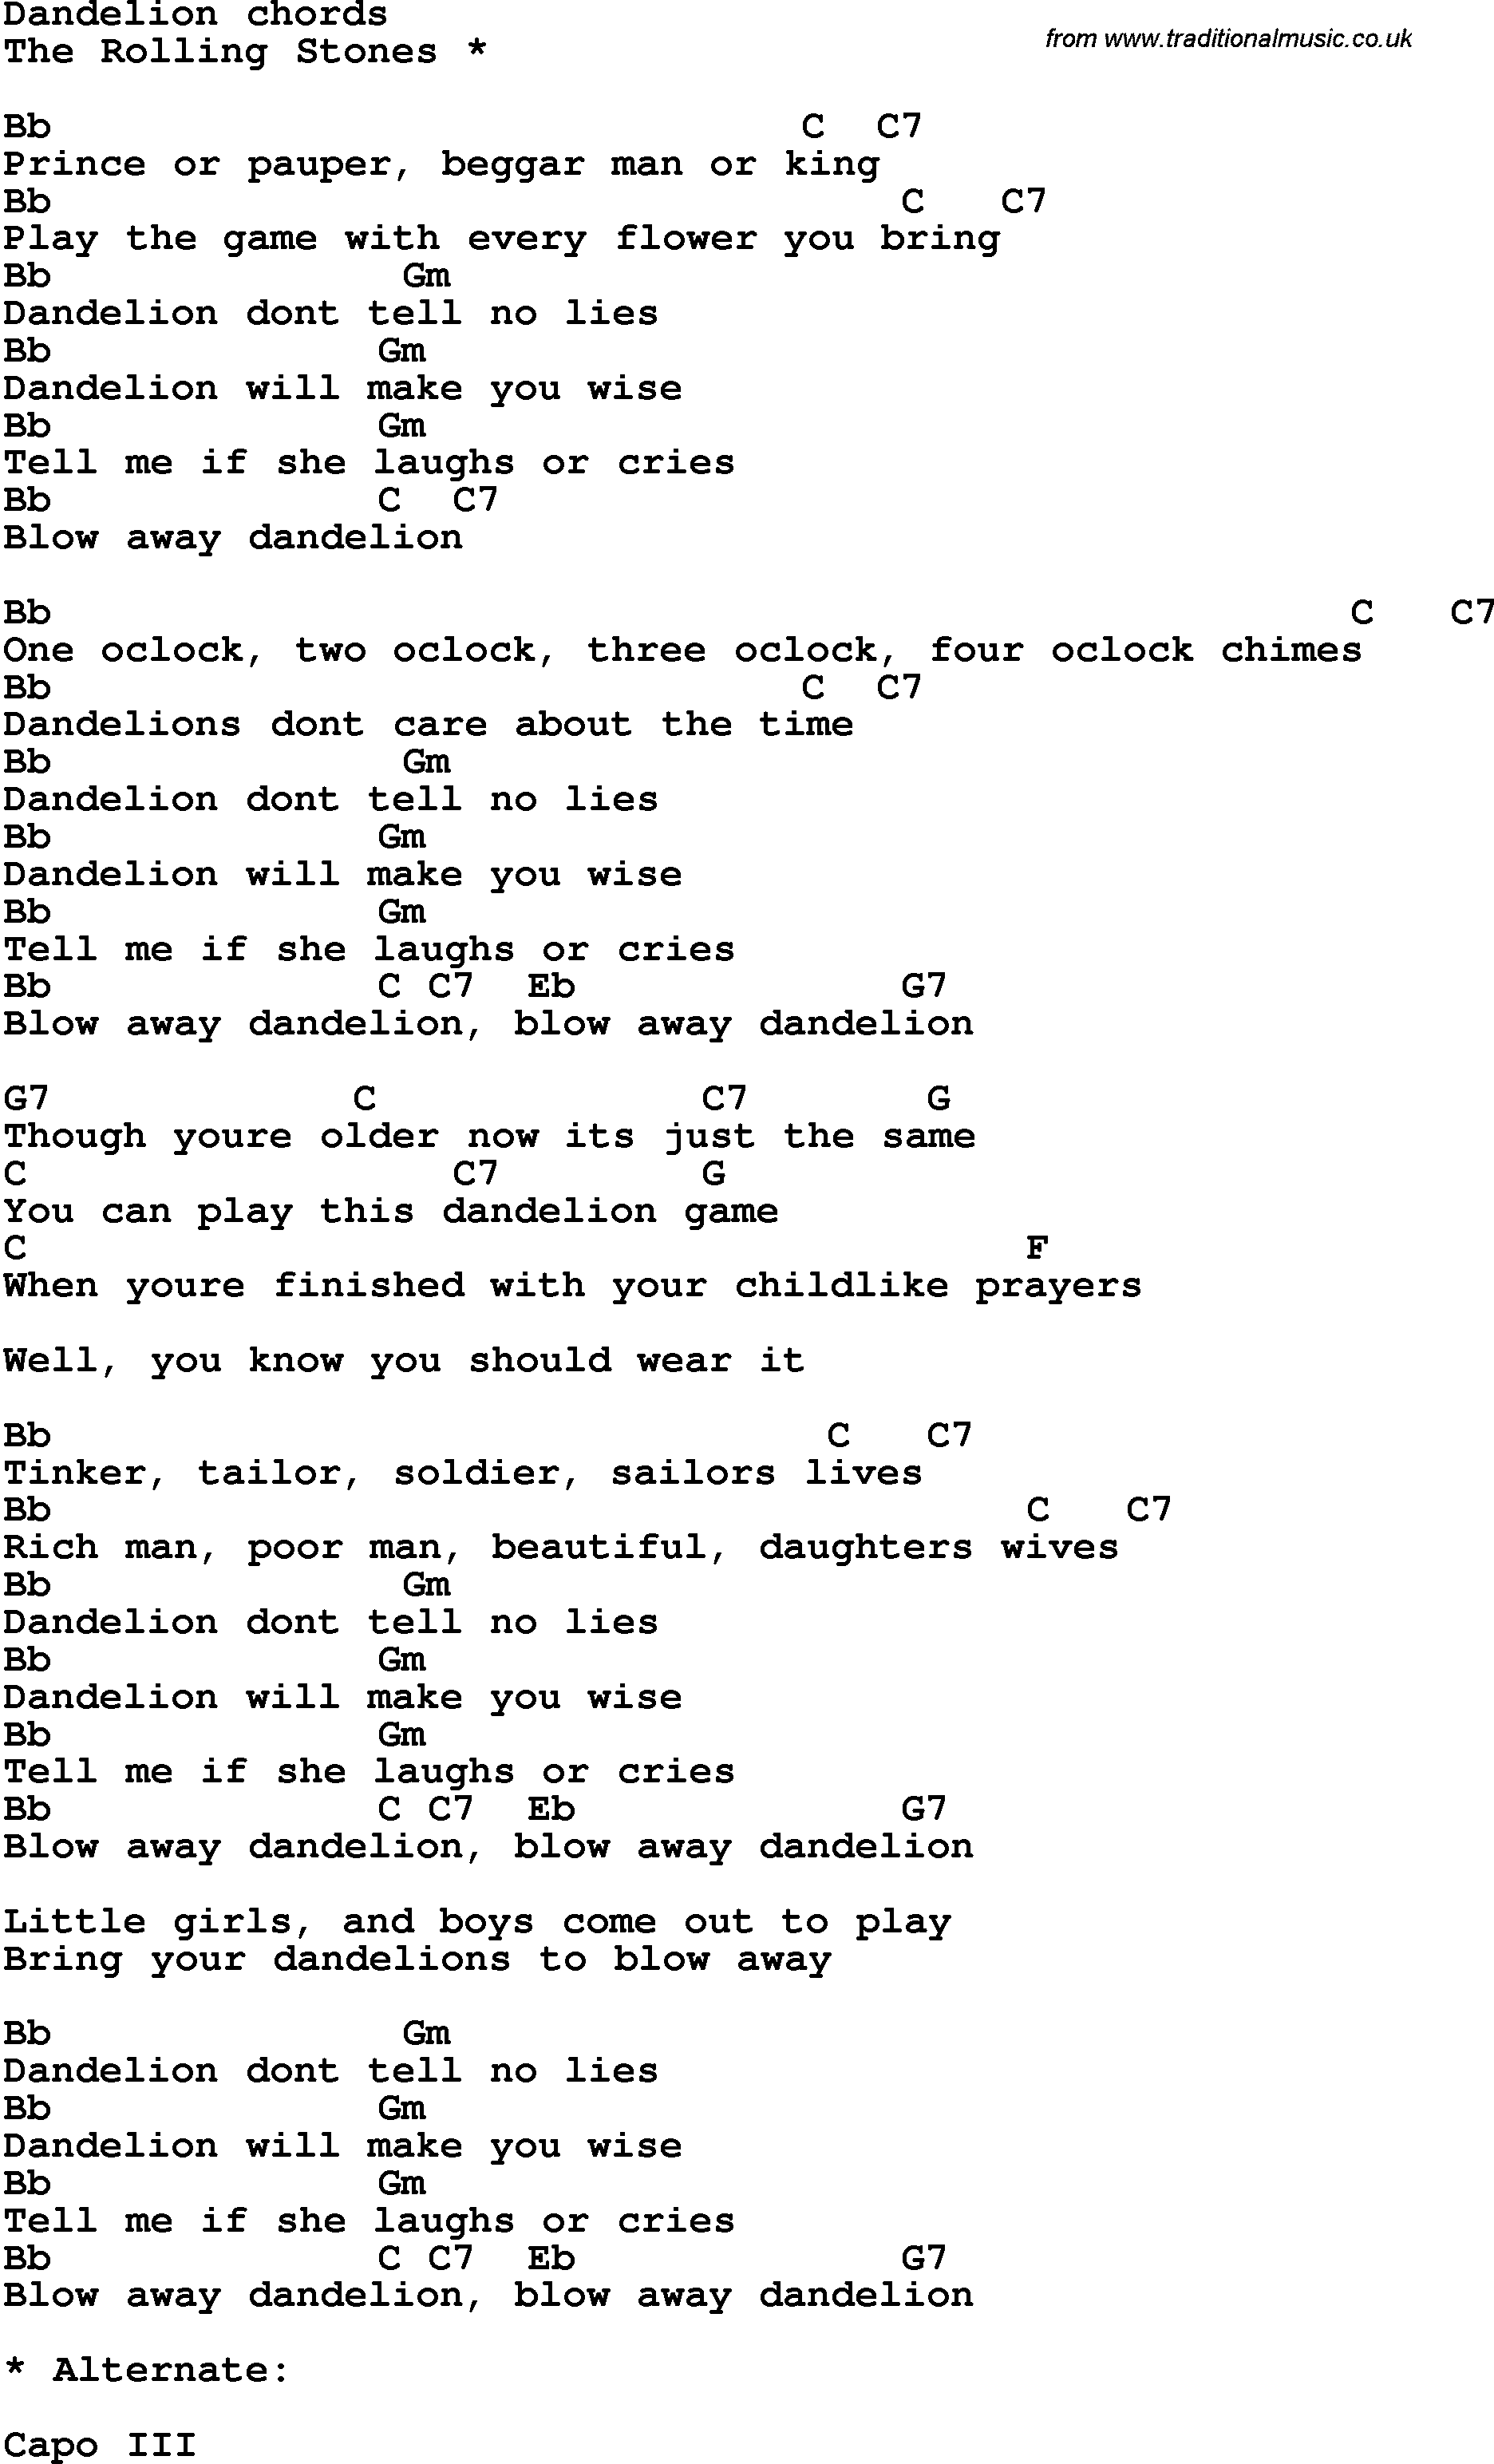 Song Lyrics with guitar chords for Dandelion